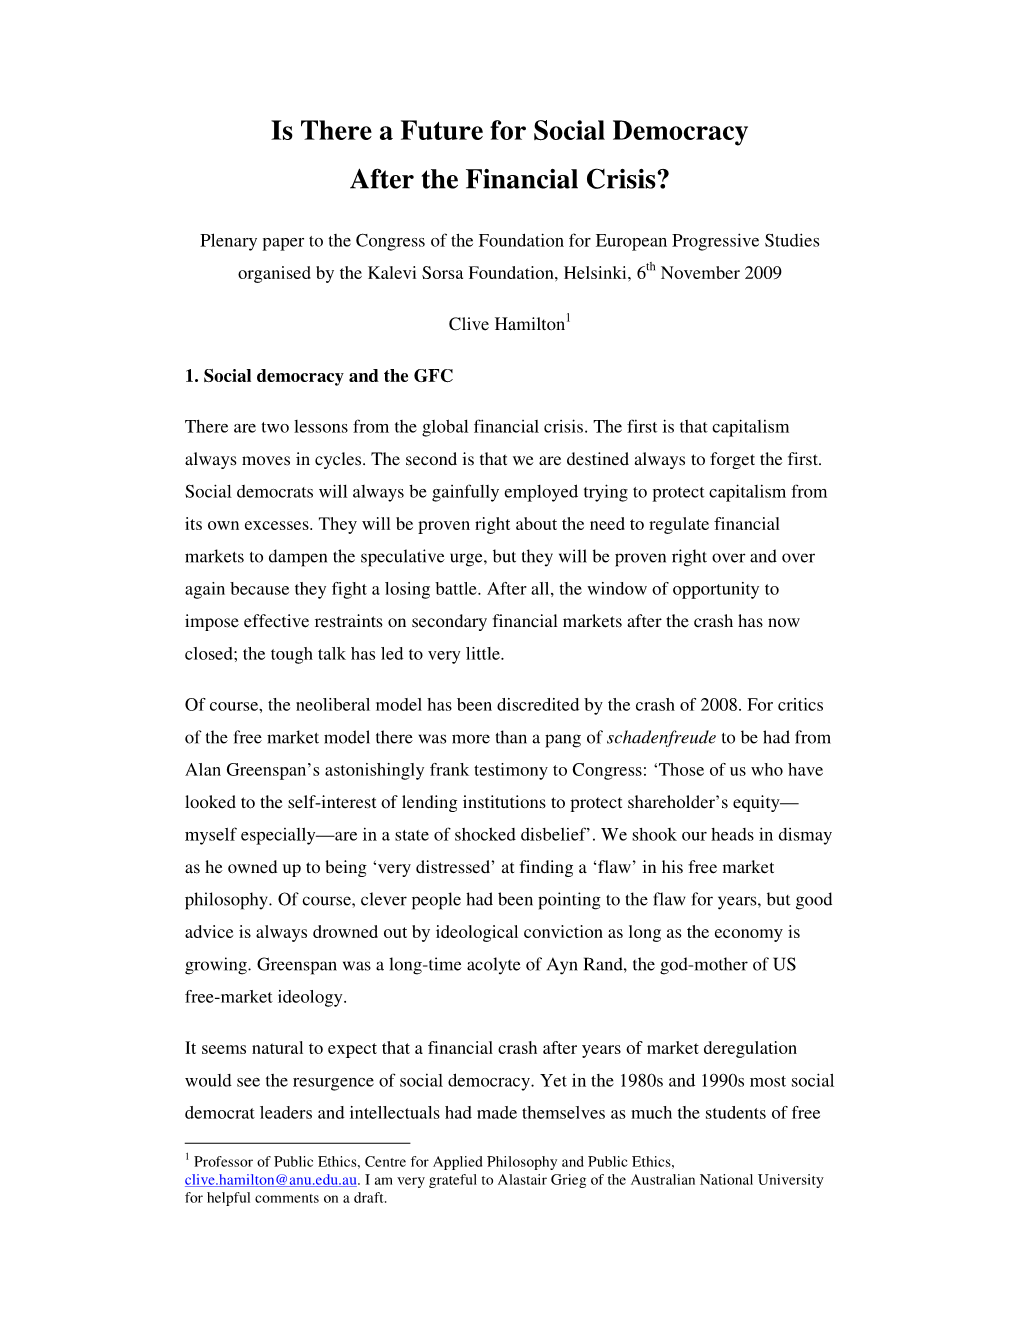 Is There a Future for Social Democracy After the Financial Crisis?